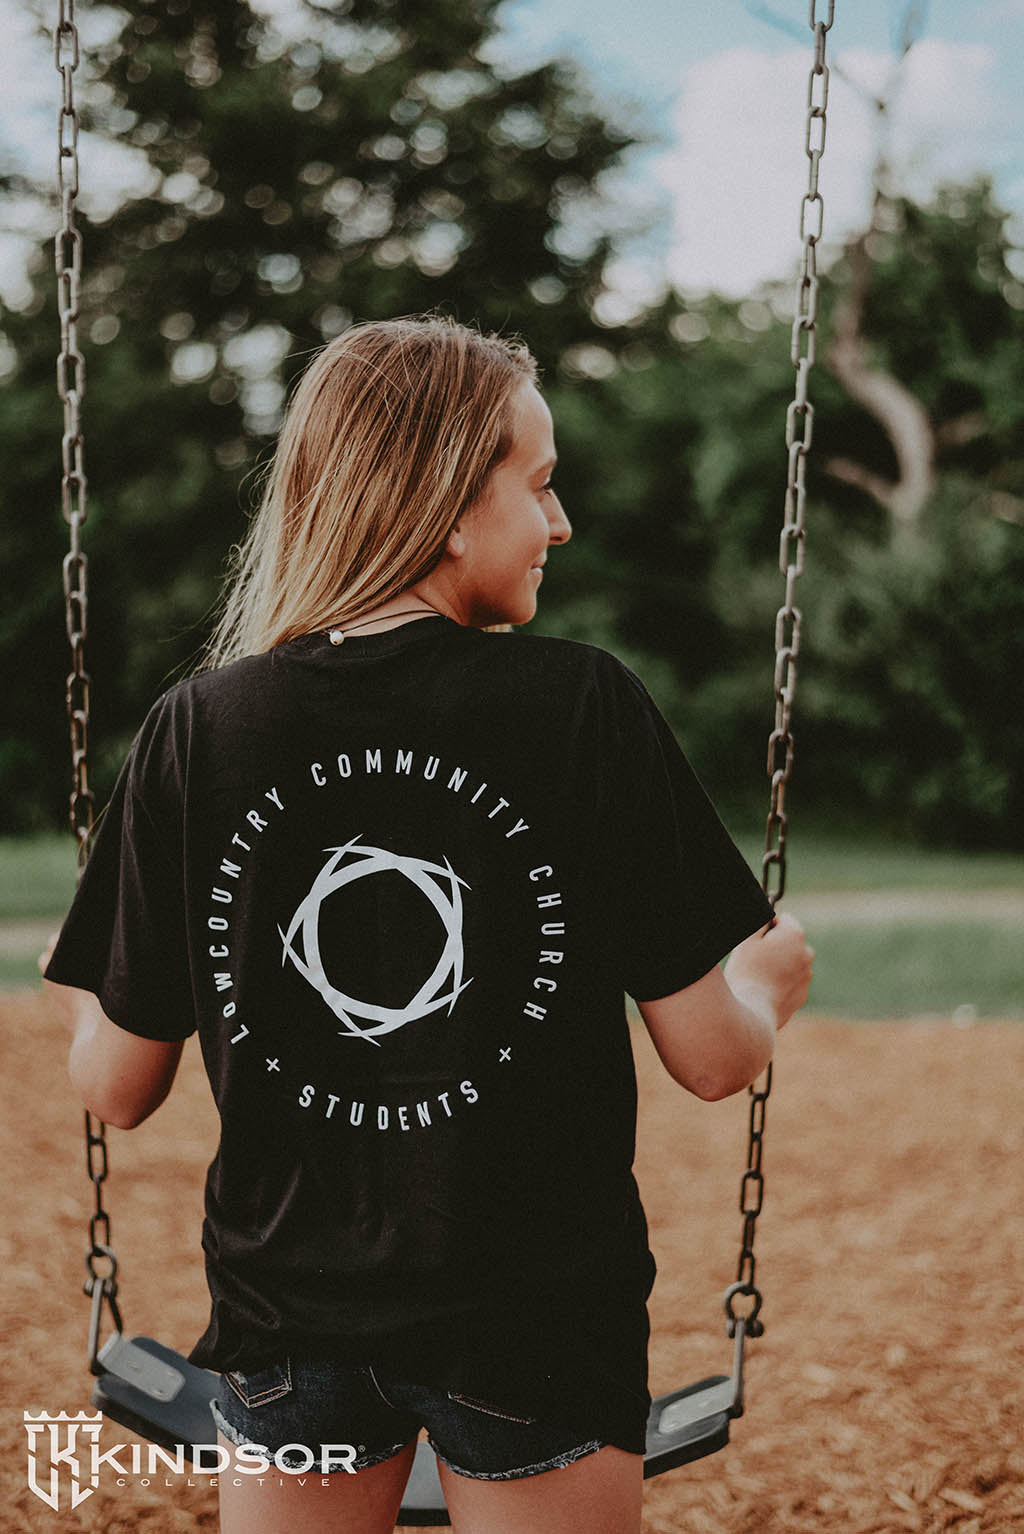 Low Country Community Church Students Tshirt